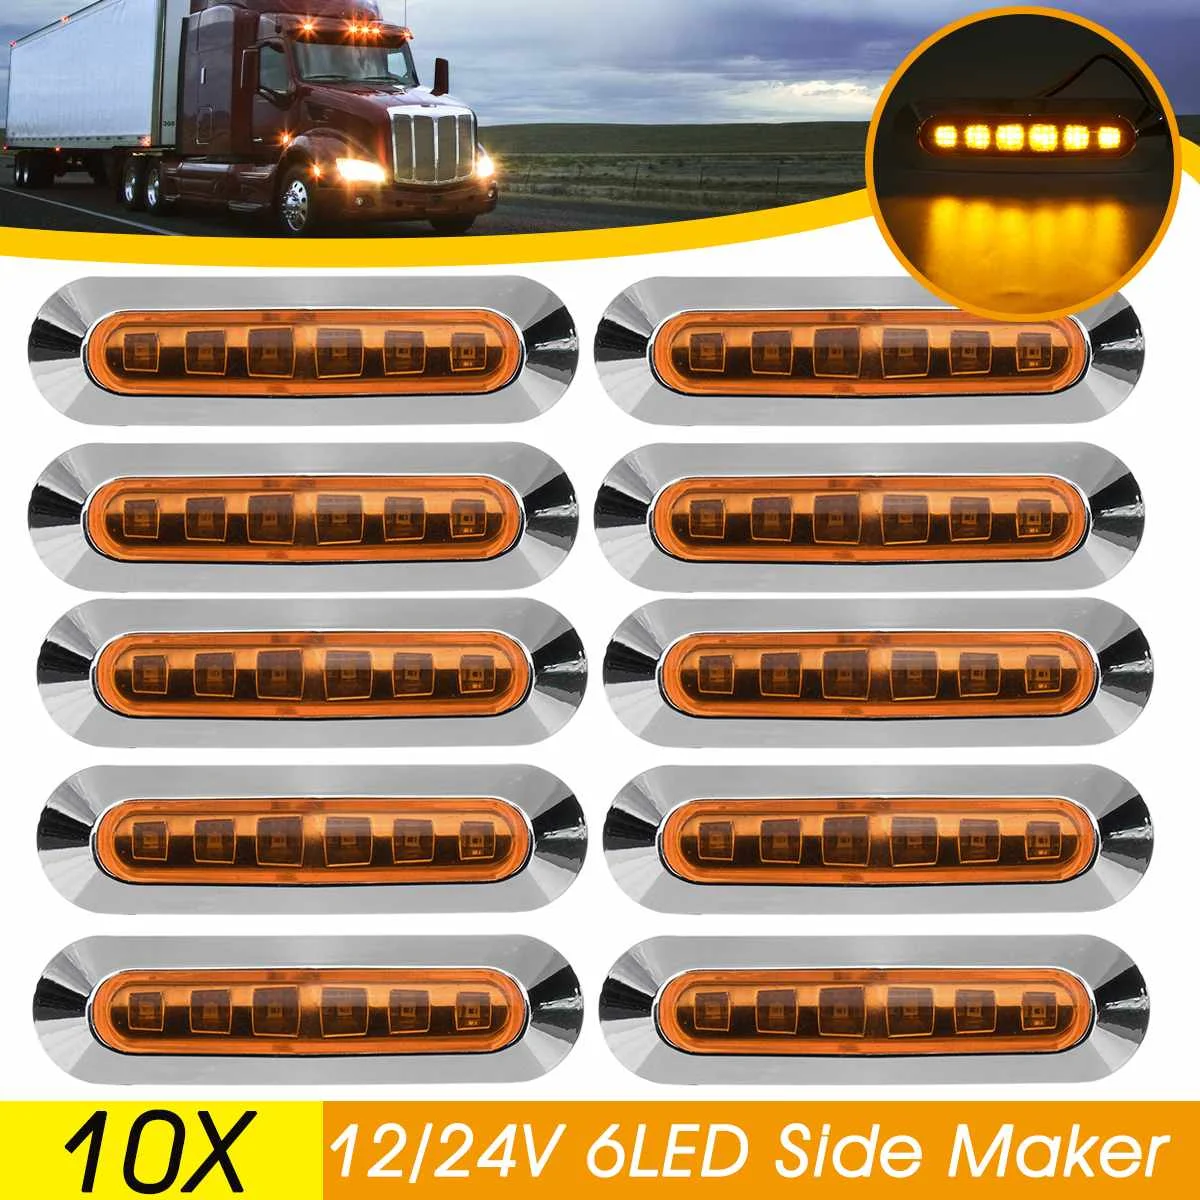 Turn Signal Truck Bus Trailer Car SUV Boat Camper Yellow 10pcs 12V Side Marker Lights 6SMD LED Lamps Front Rear Light Position for Truck Trailer Lorry Cab Bus Boat Tractor Motorhome Tail 